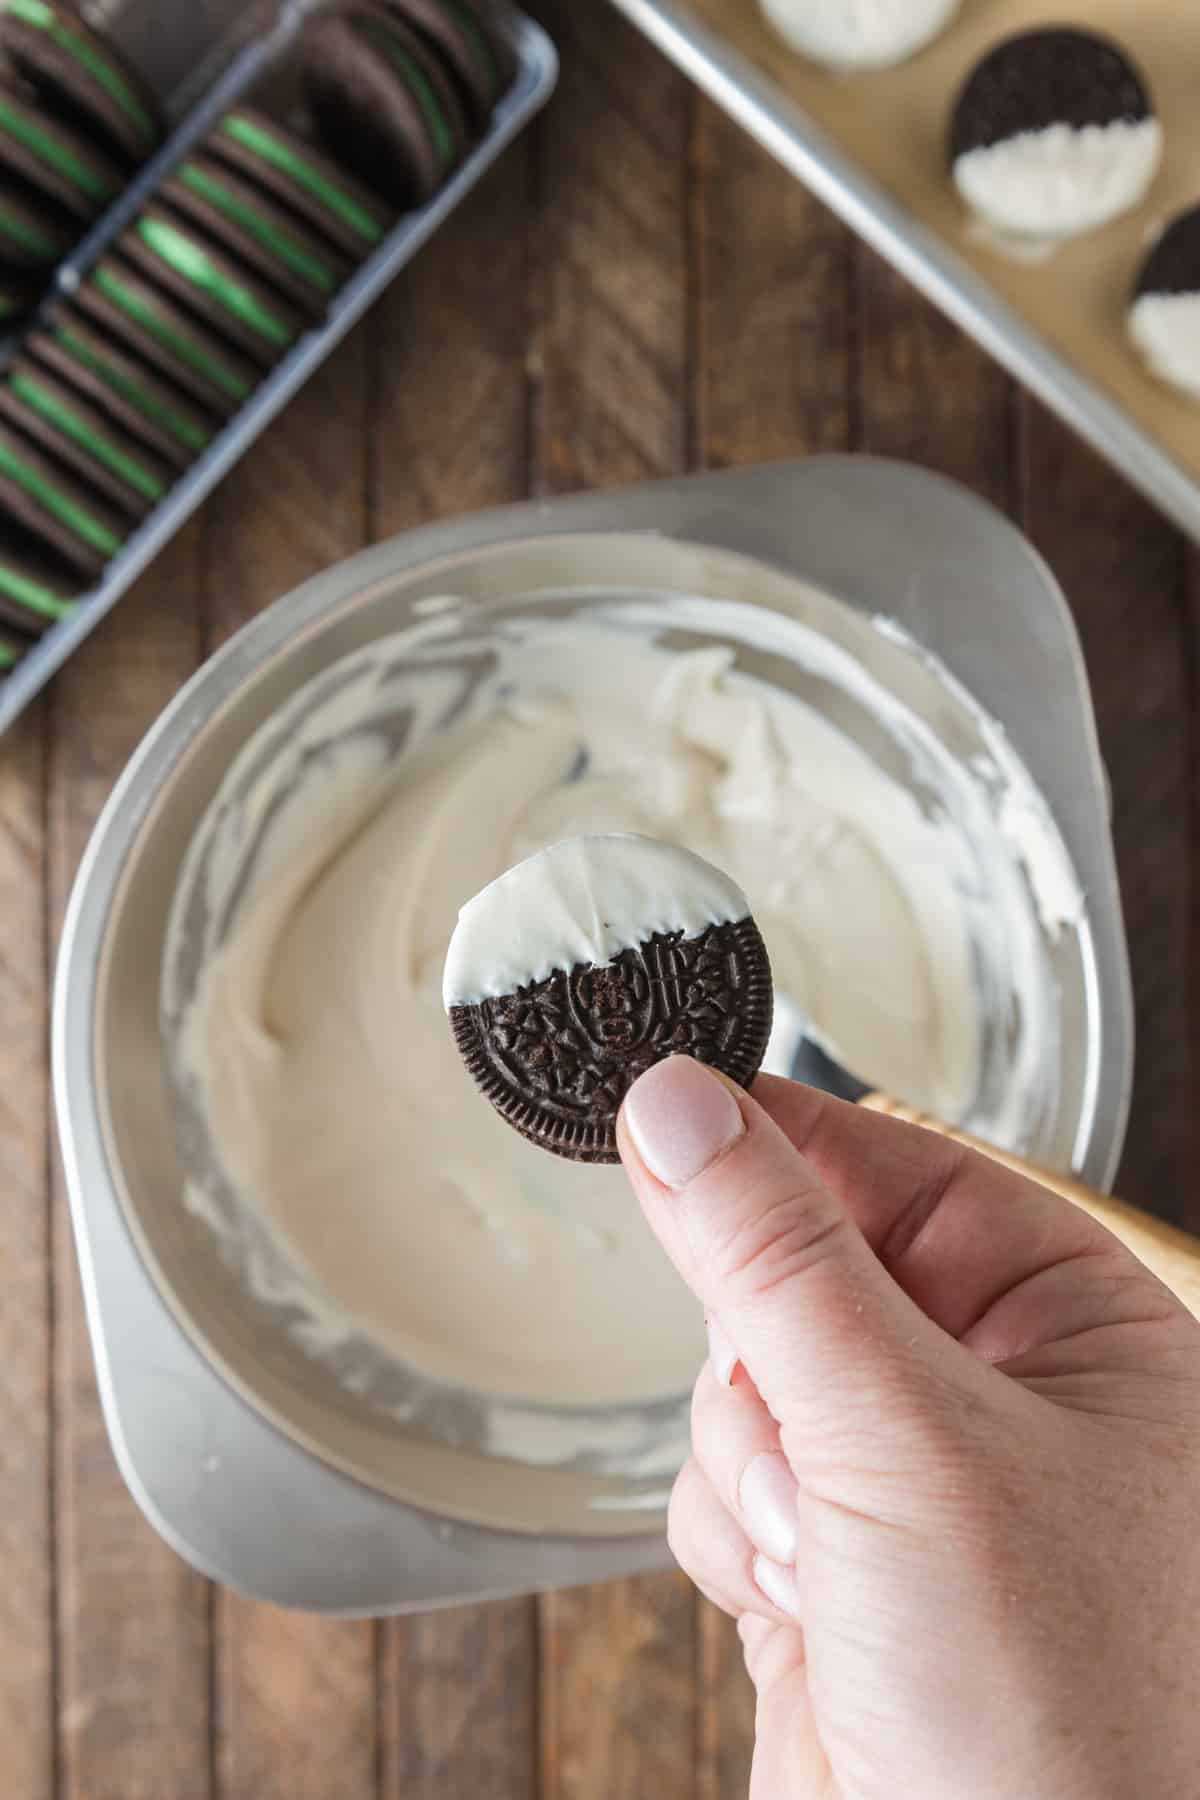 Oreo cookie being dipped into melted chocolate